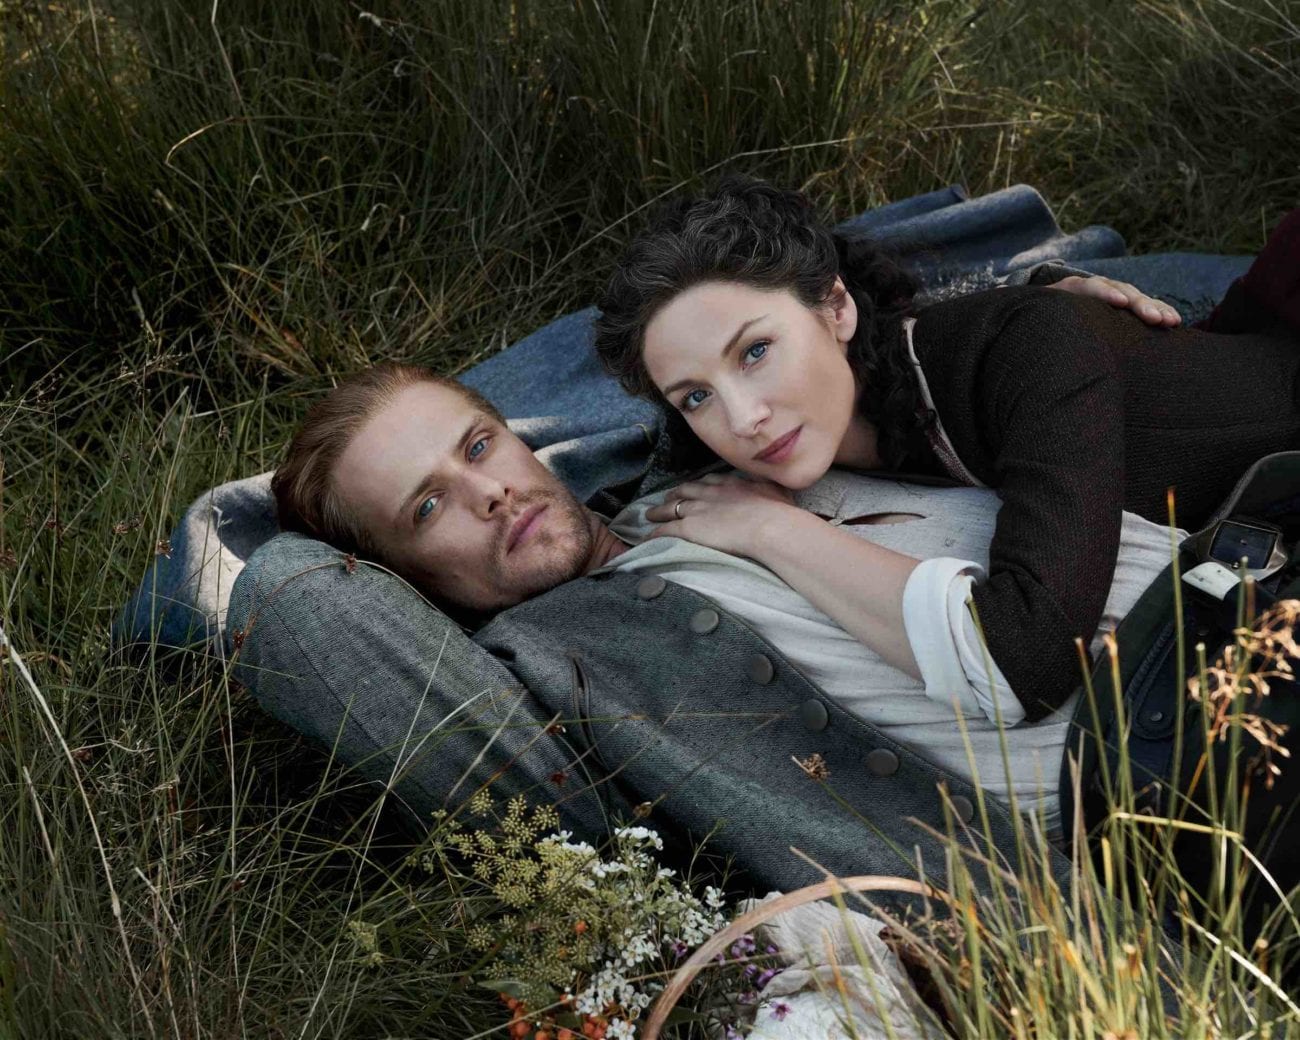 Can't get enough of Jamie and Claire's romance in 'Outlander'? We've gathered the most romantic quotes from Jamie and Claire.